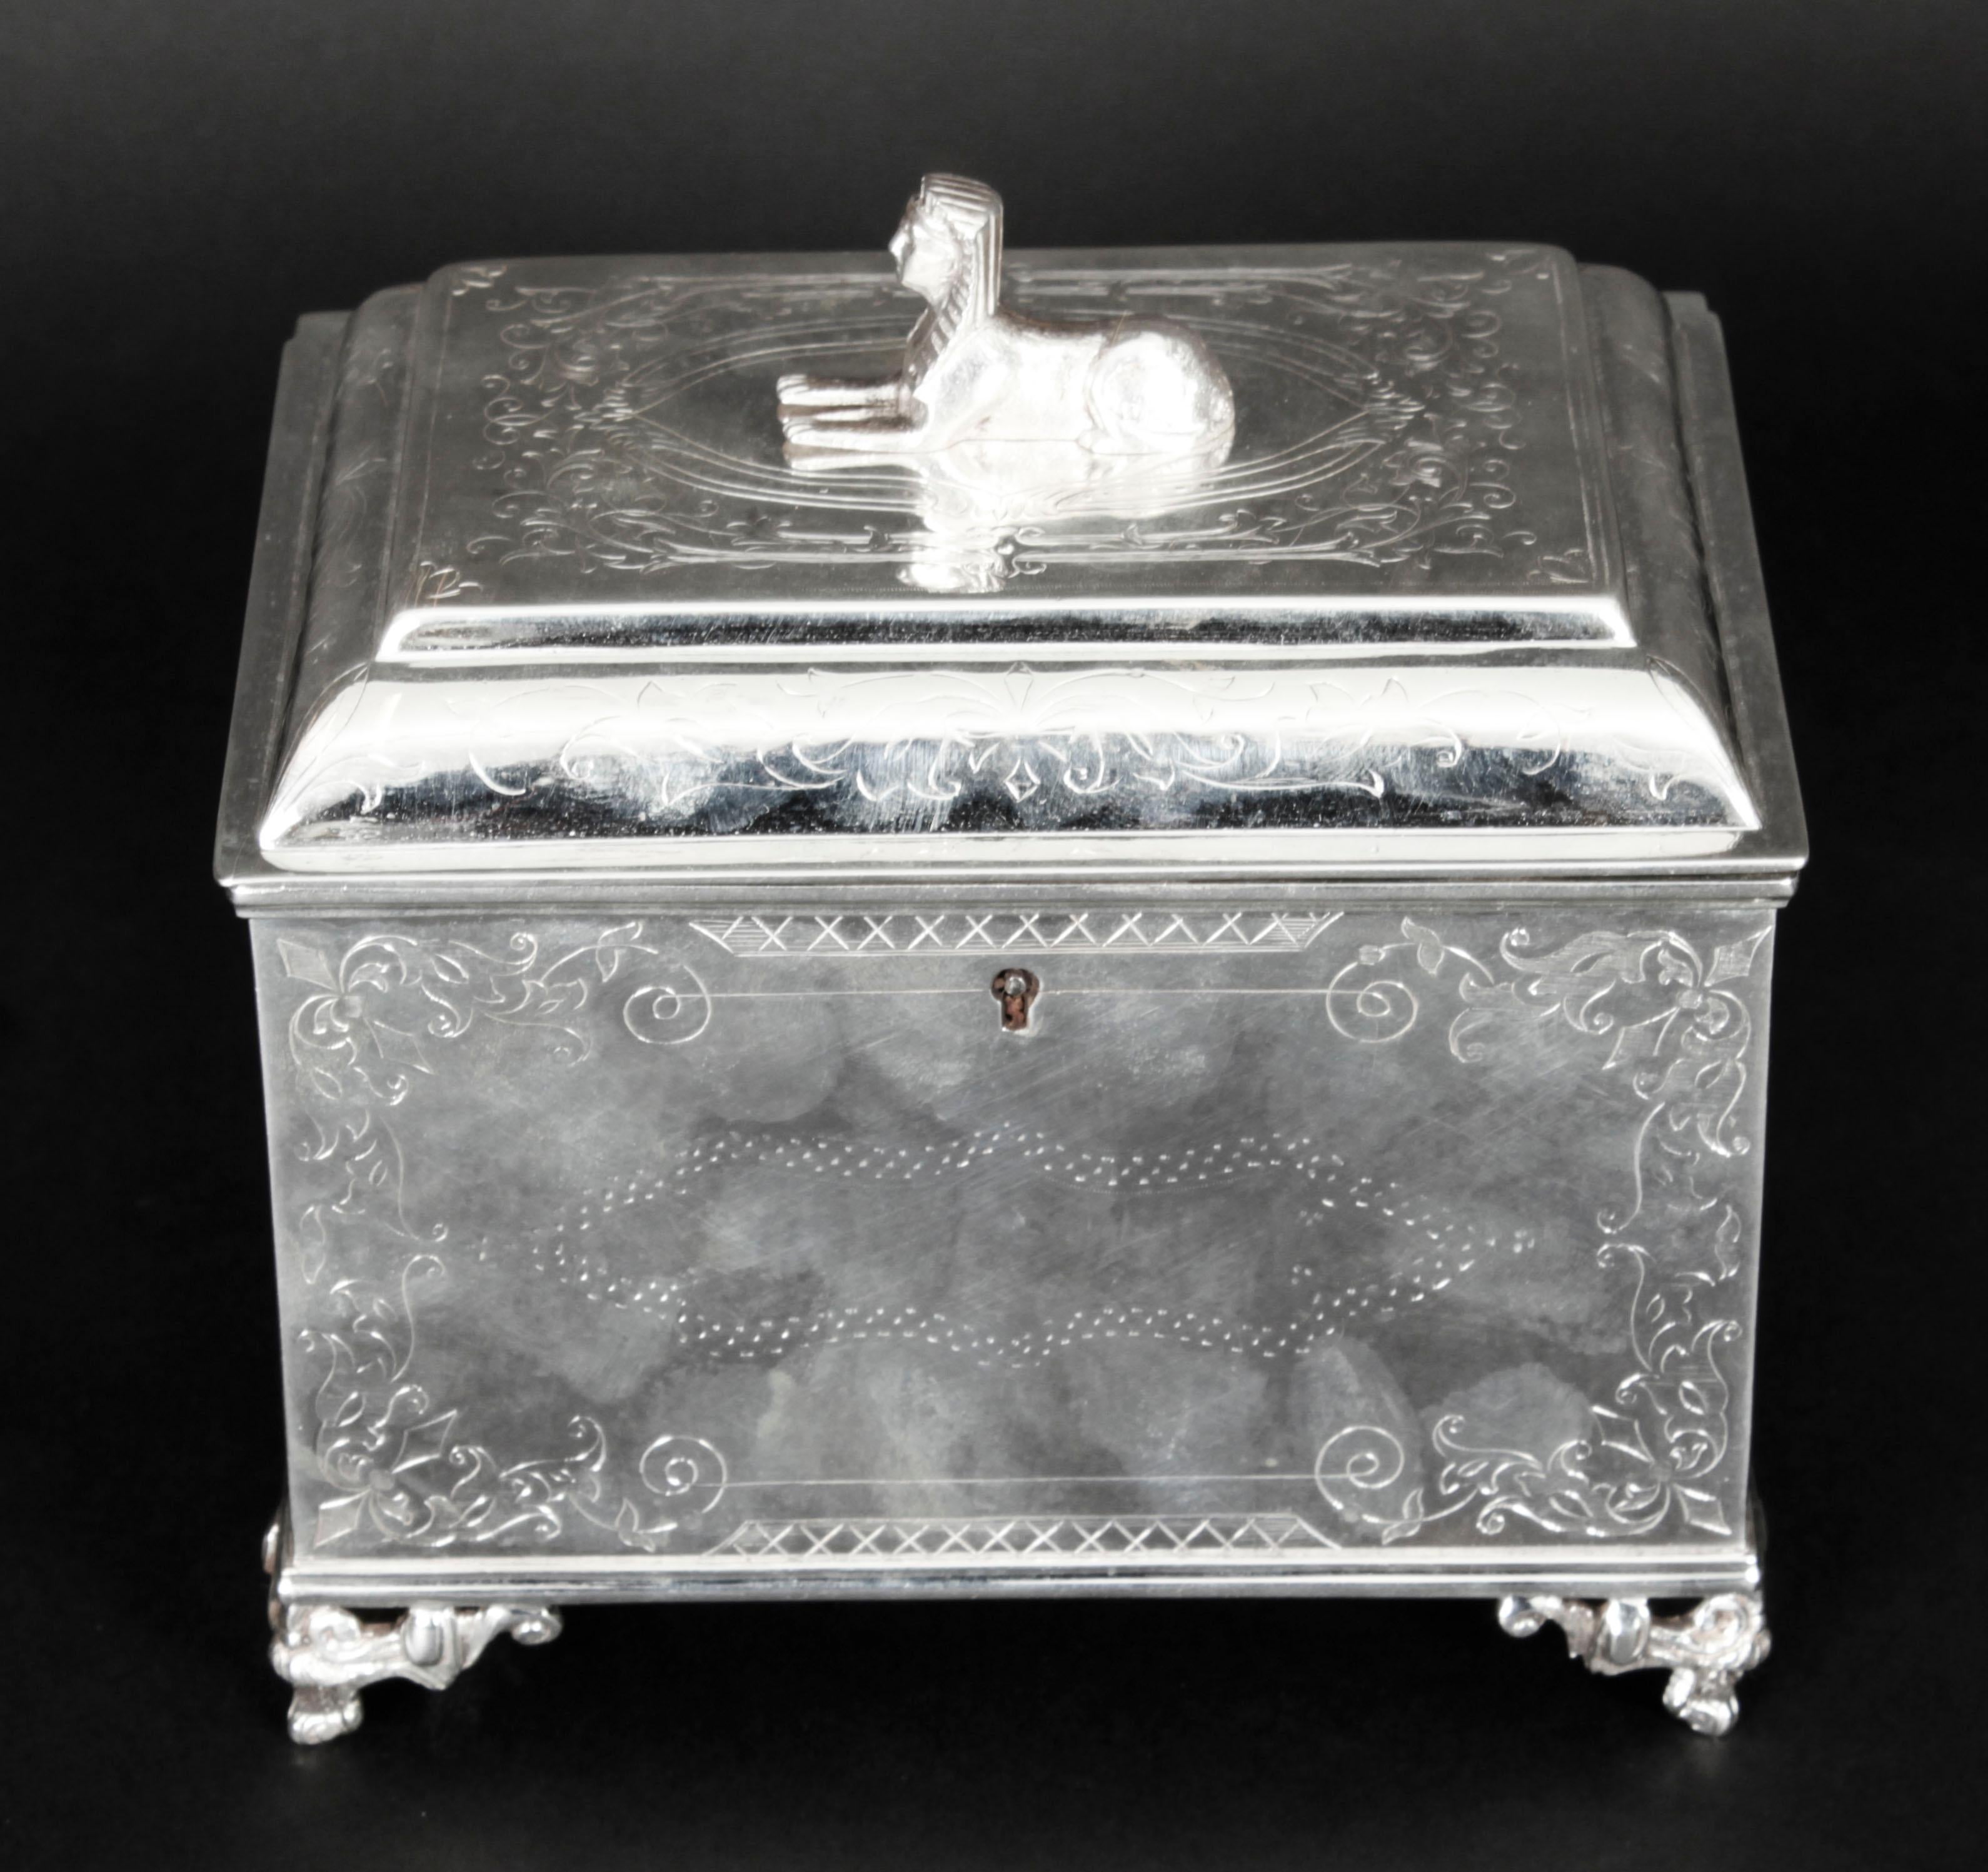 This is a very attractive antique Empire Revival silver plated tea caddy, circa 1860 in date.

The rectangular lidded caddy features exquisite engraved decoration and is topped with a decorative Sphynx. 
 
Add an elegant touch to your next